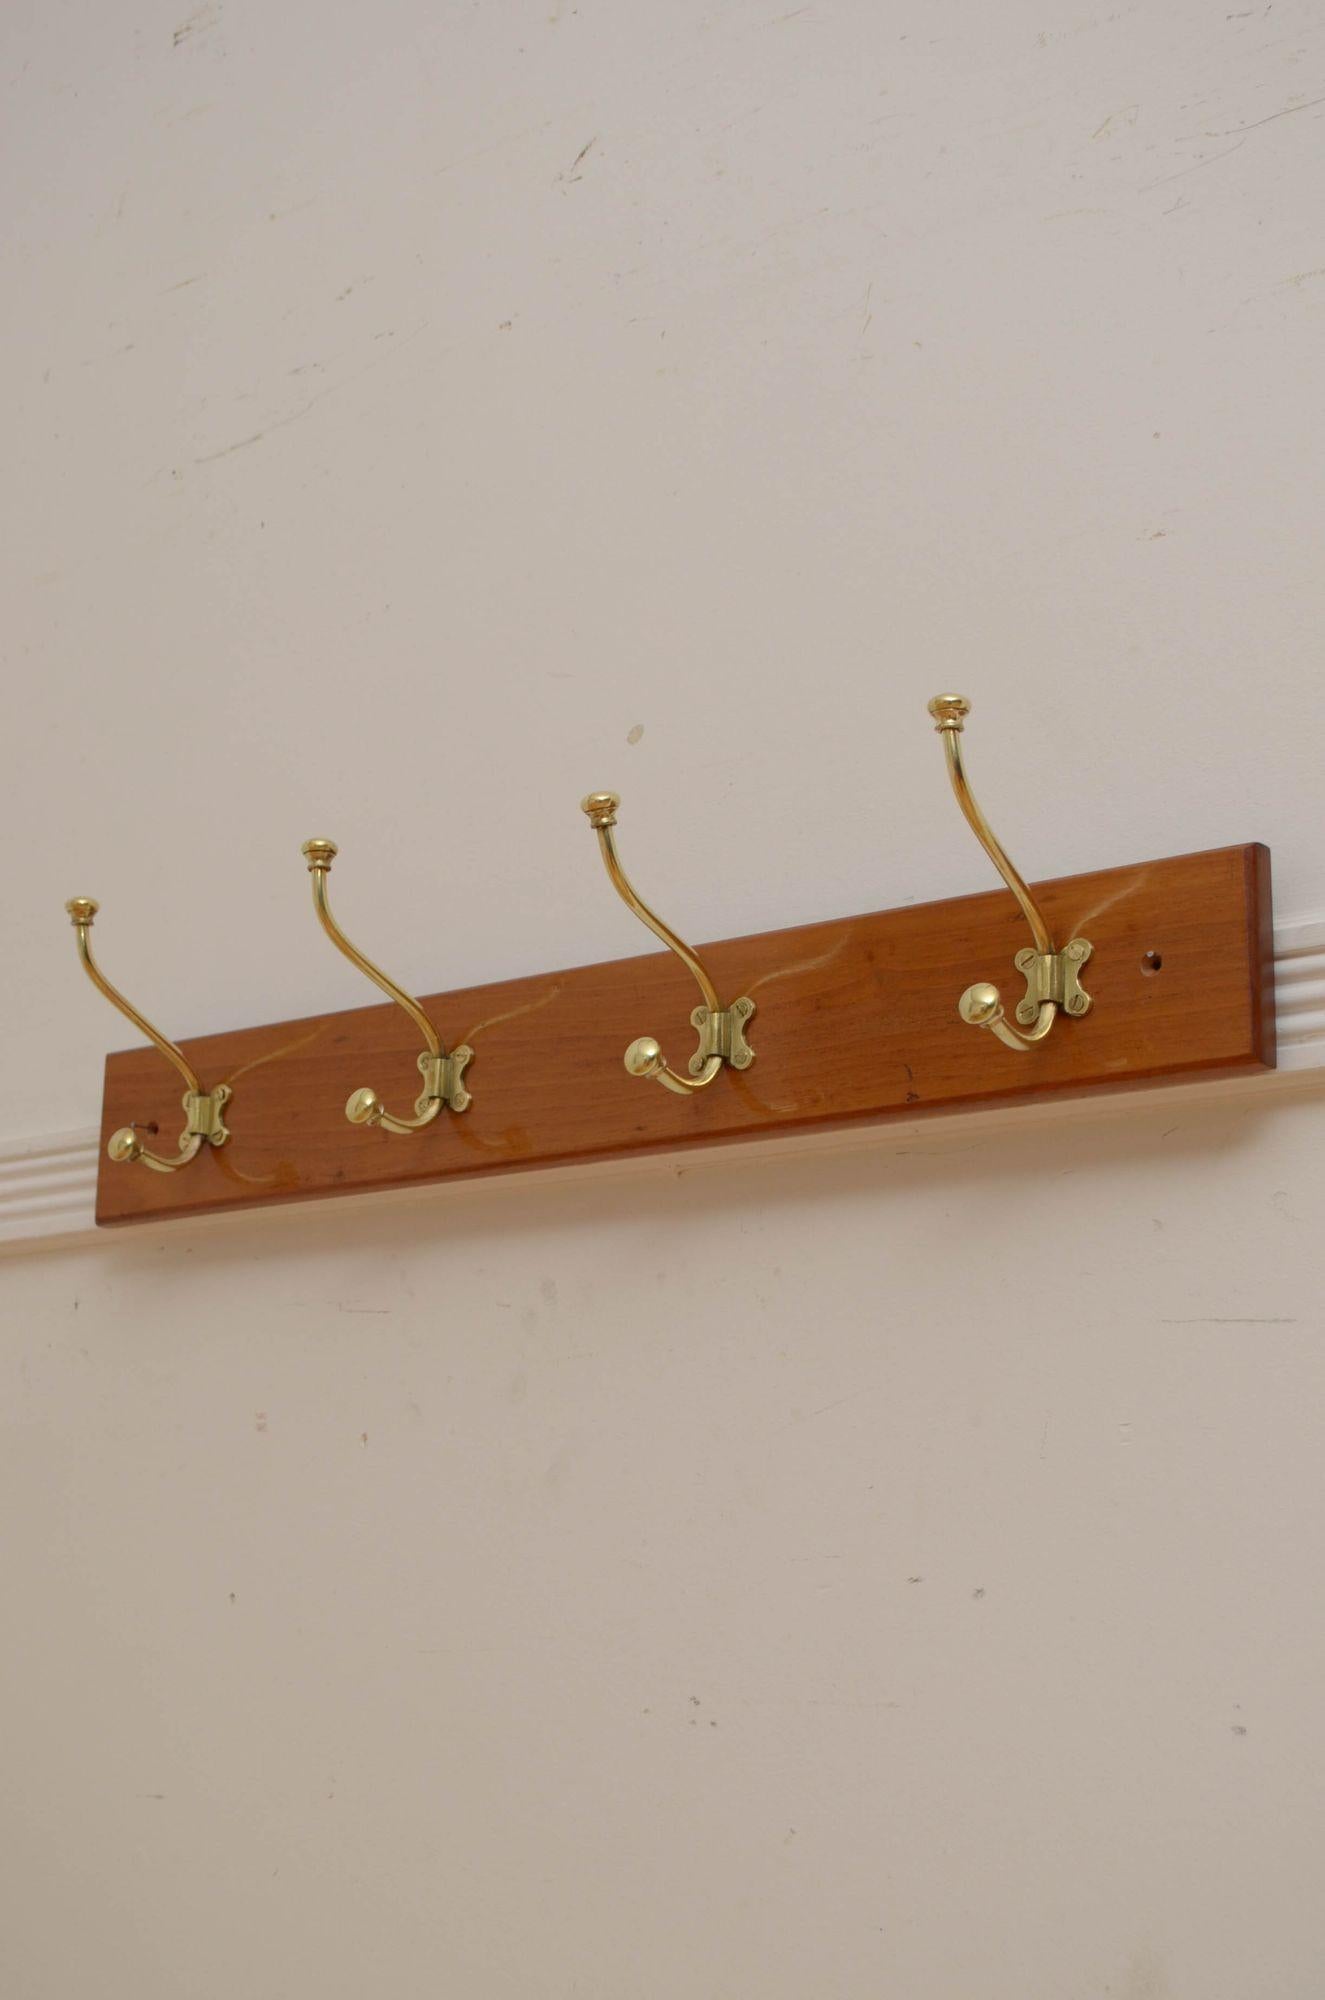 P0280 Fine Victorian coat rack with four shaped coat and hat hooks in brass on solid walnut backing. Cleaned and polished, ready to place at home. UK mainland delivery included. c1880
H6 1/4